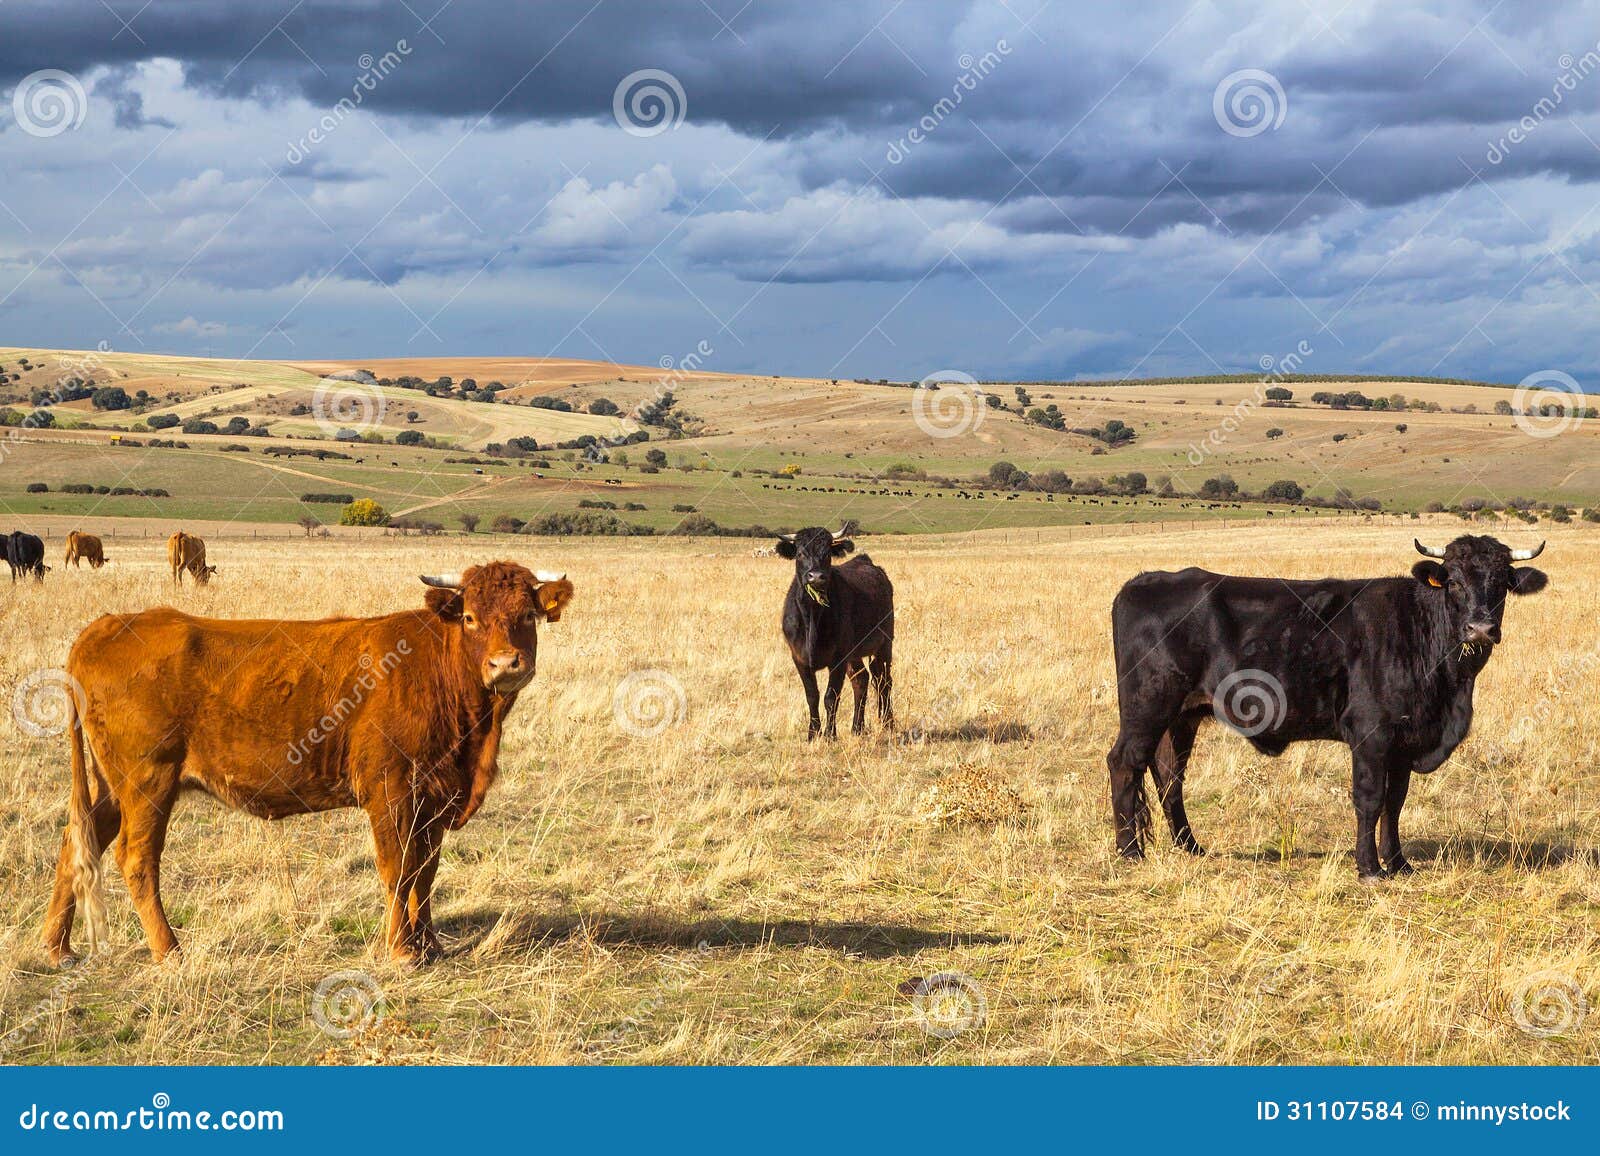 beautiful landscape with cattle and dark clouds at sunset, castilla y leon region, spain